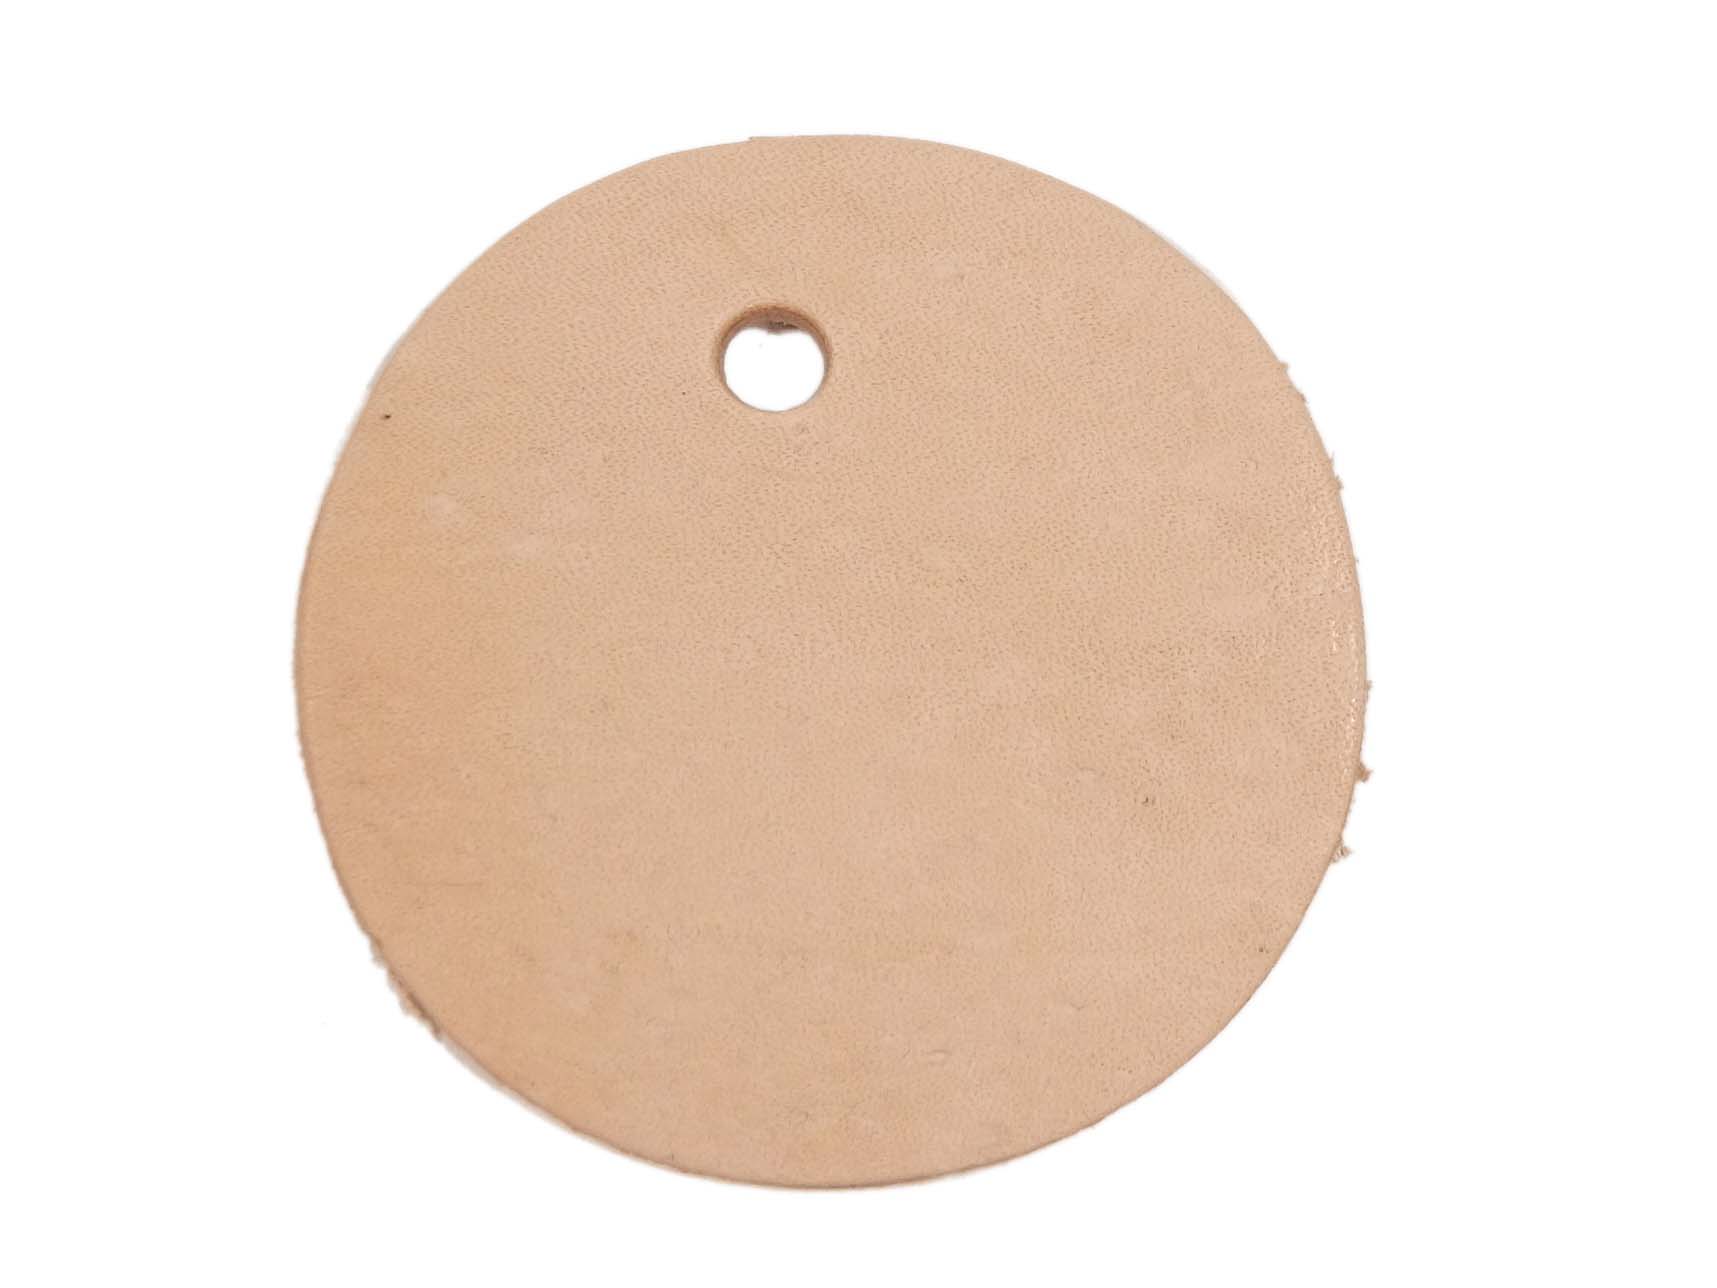 Leather Round with Hole leather rounders, leather cut-outs, leather cutouts, leather cut outs